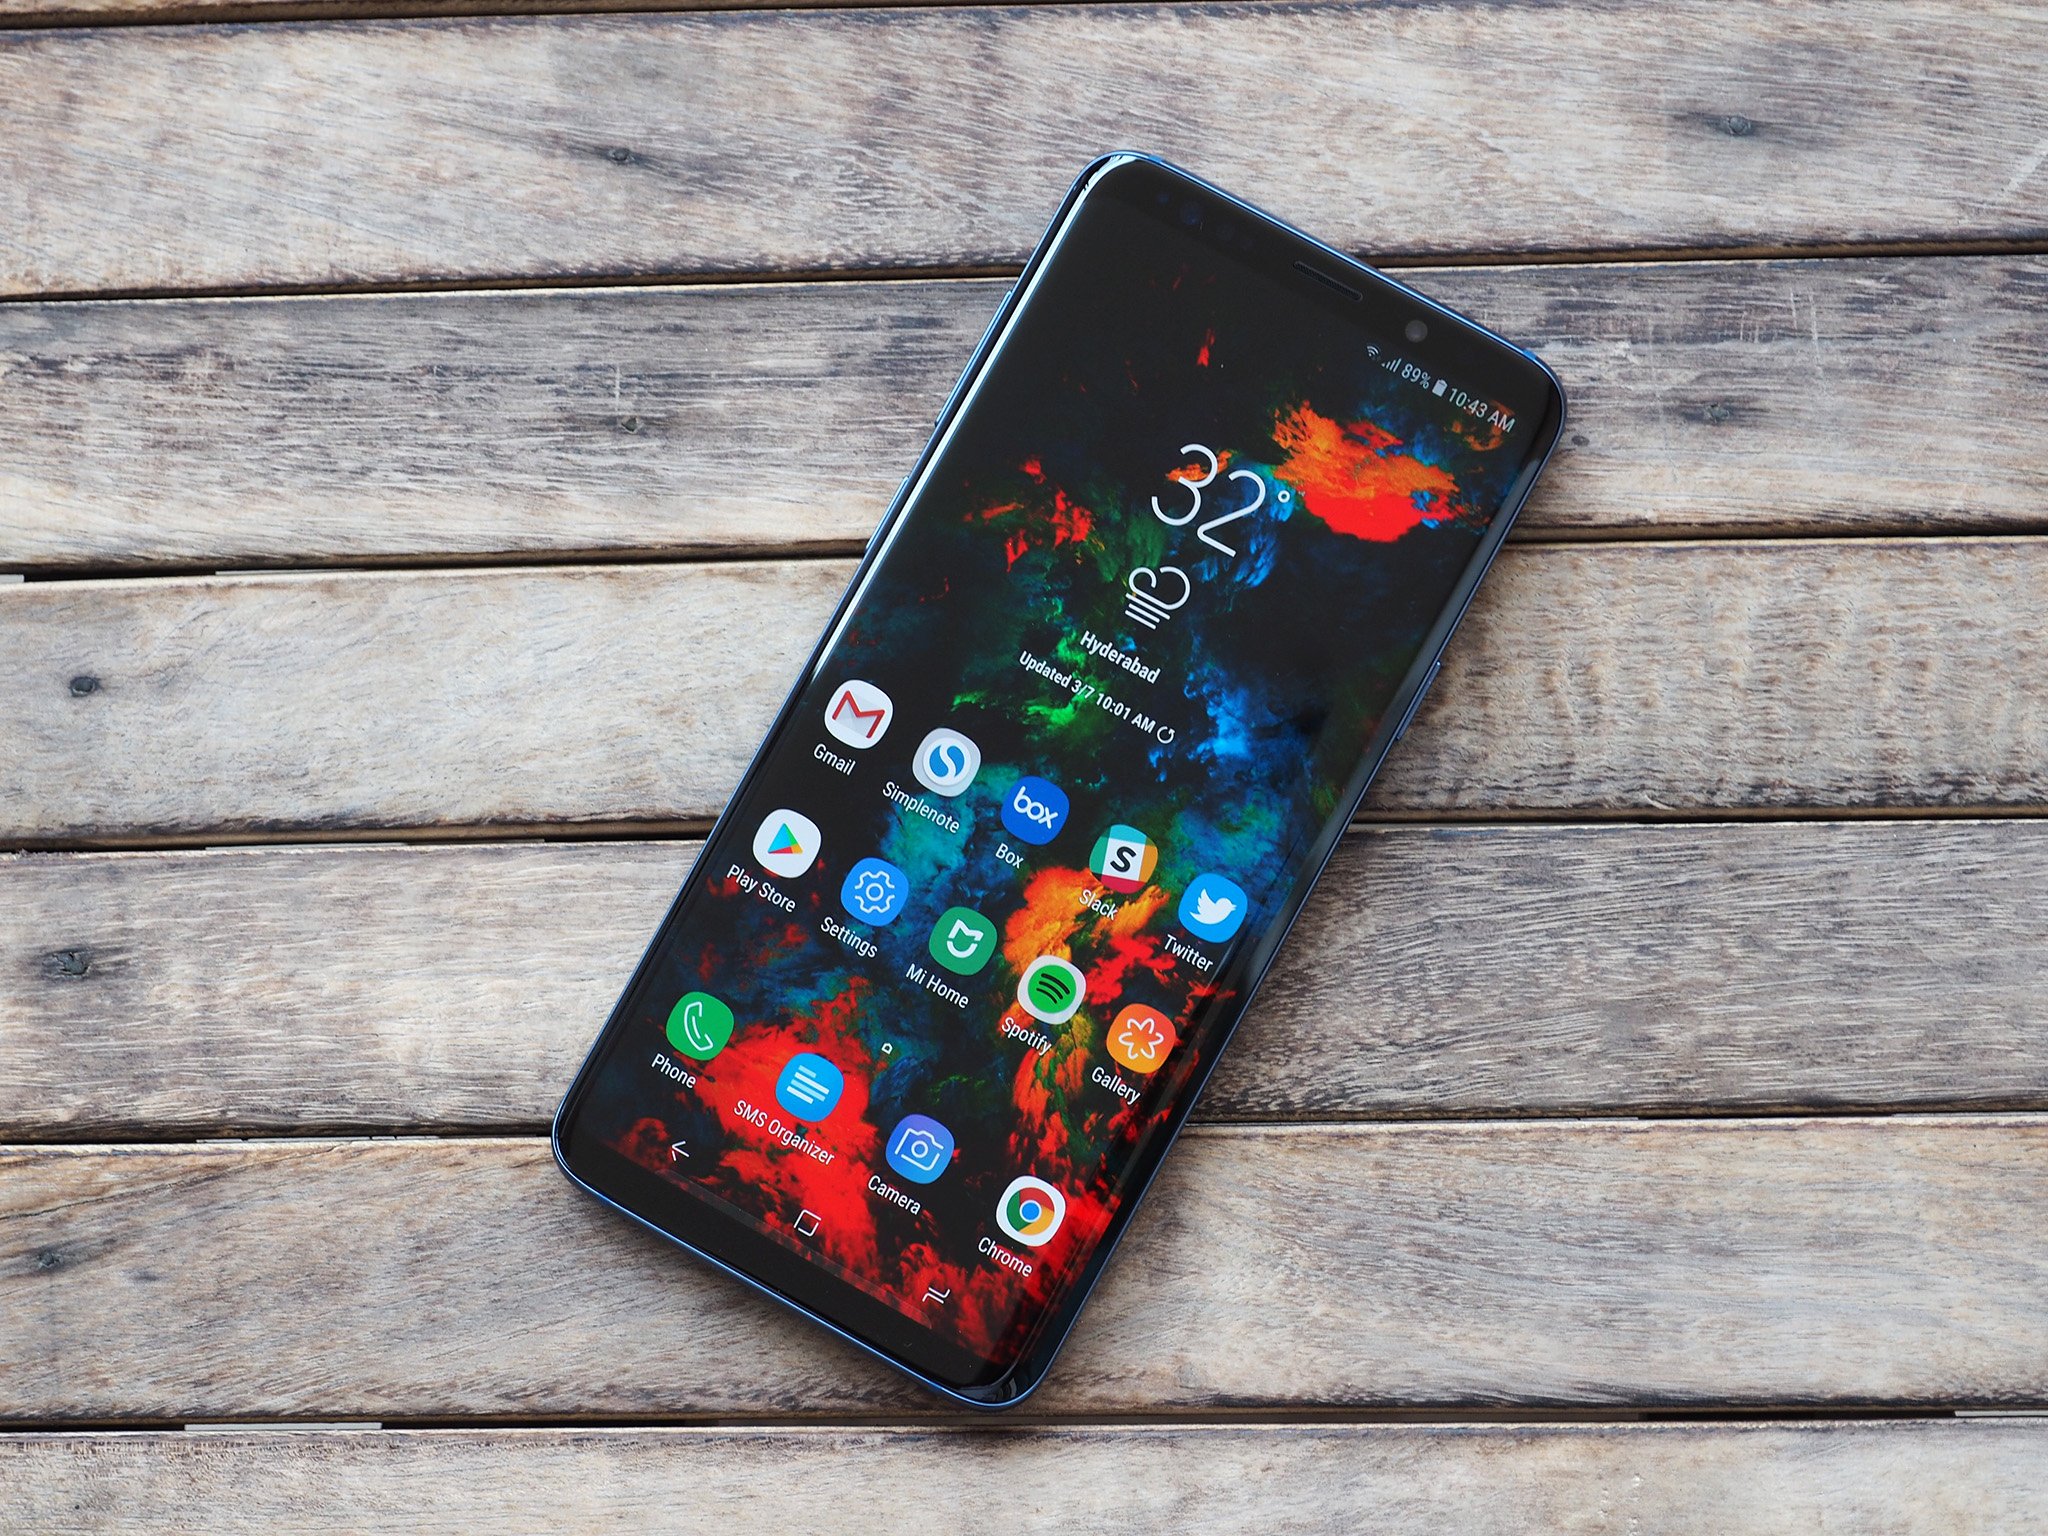 How Are You Liking The Galaxy S9 So Far Android Central